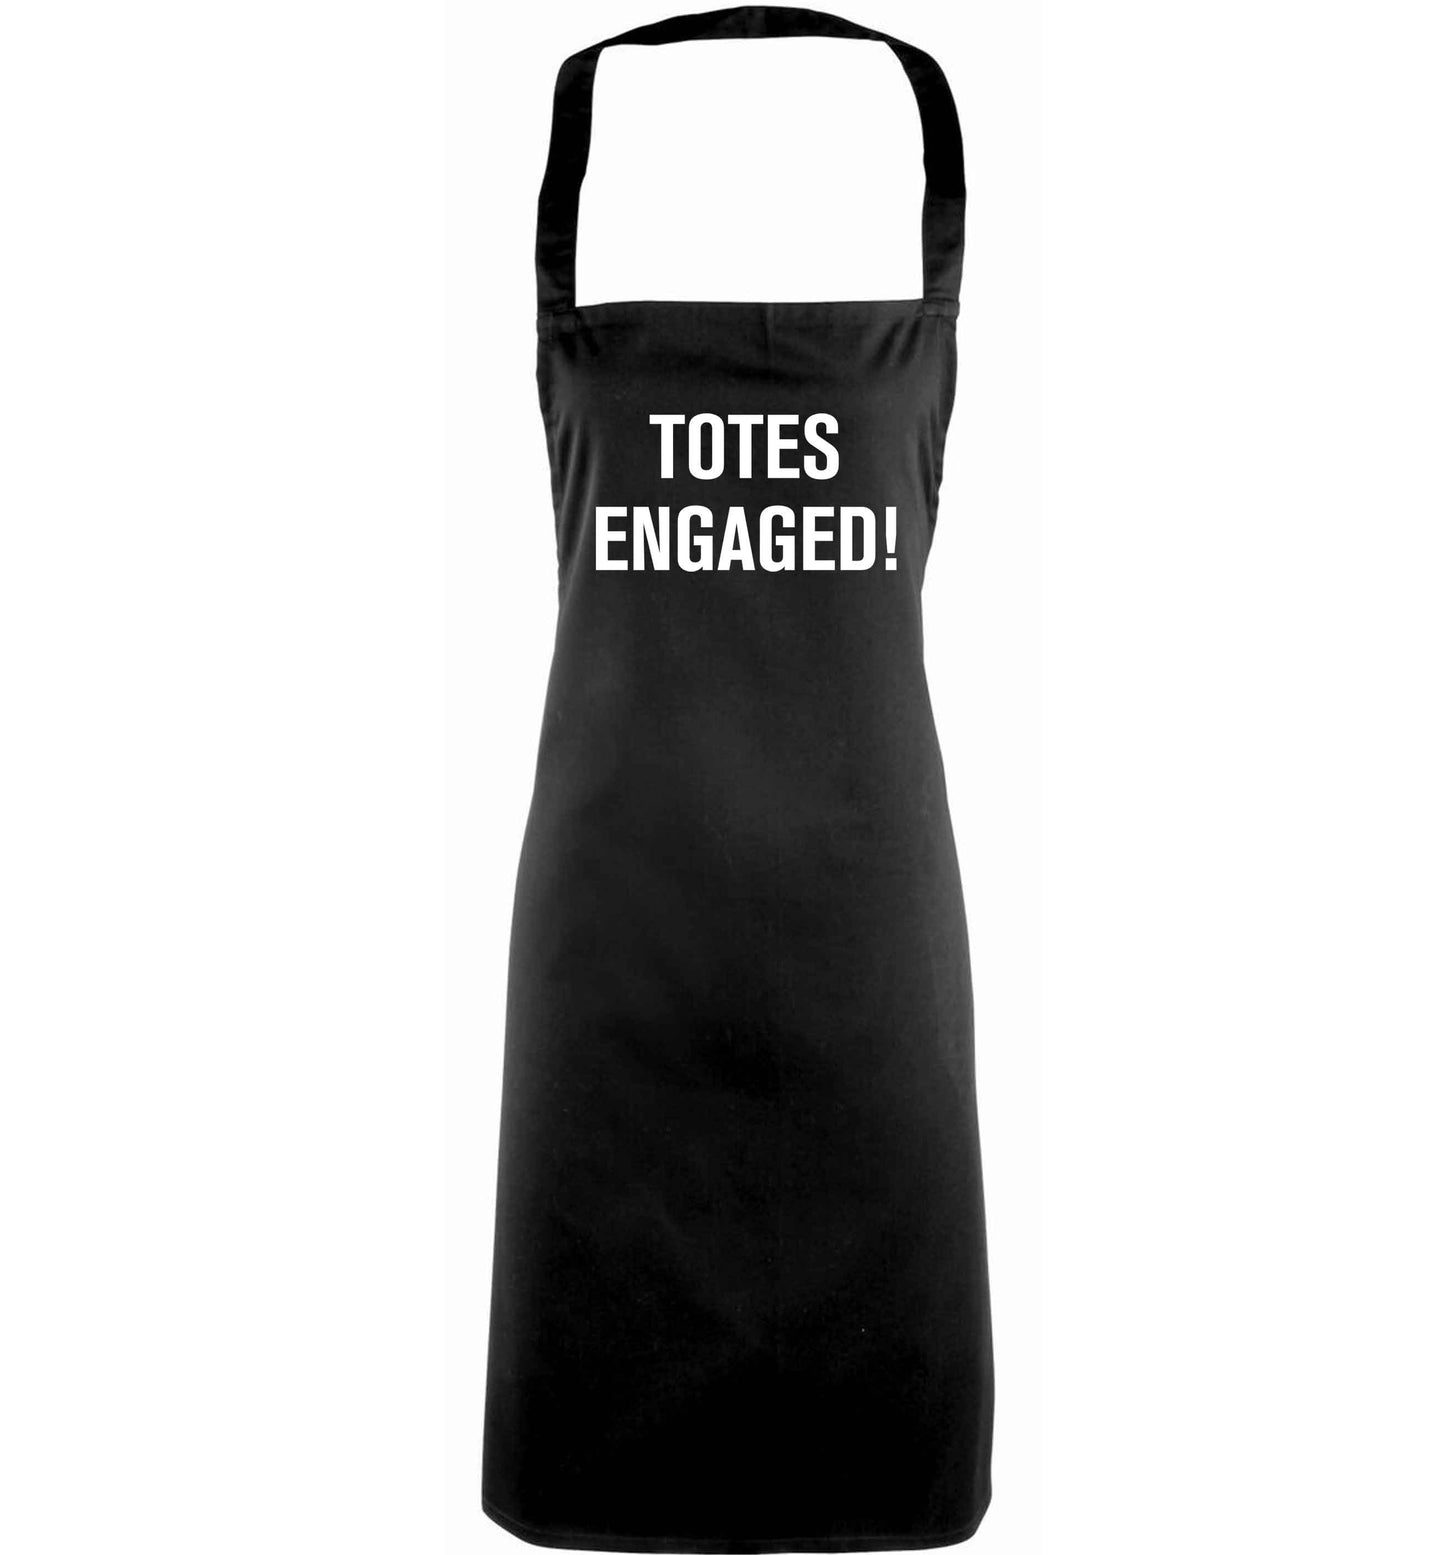 Totes engaged adults black apron